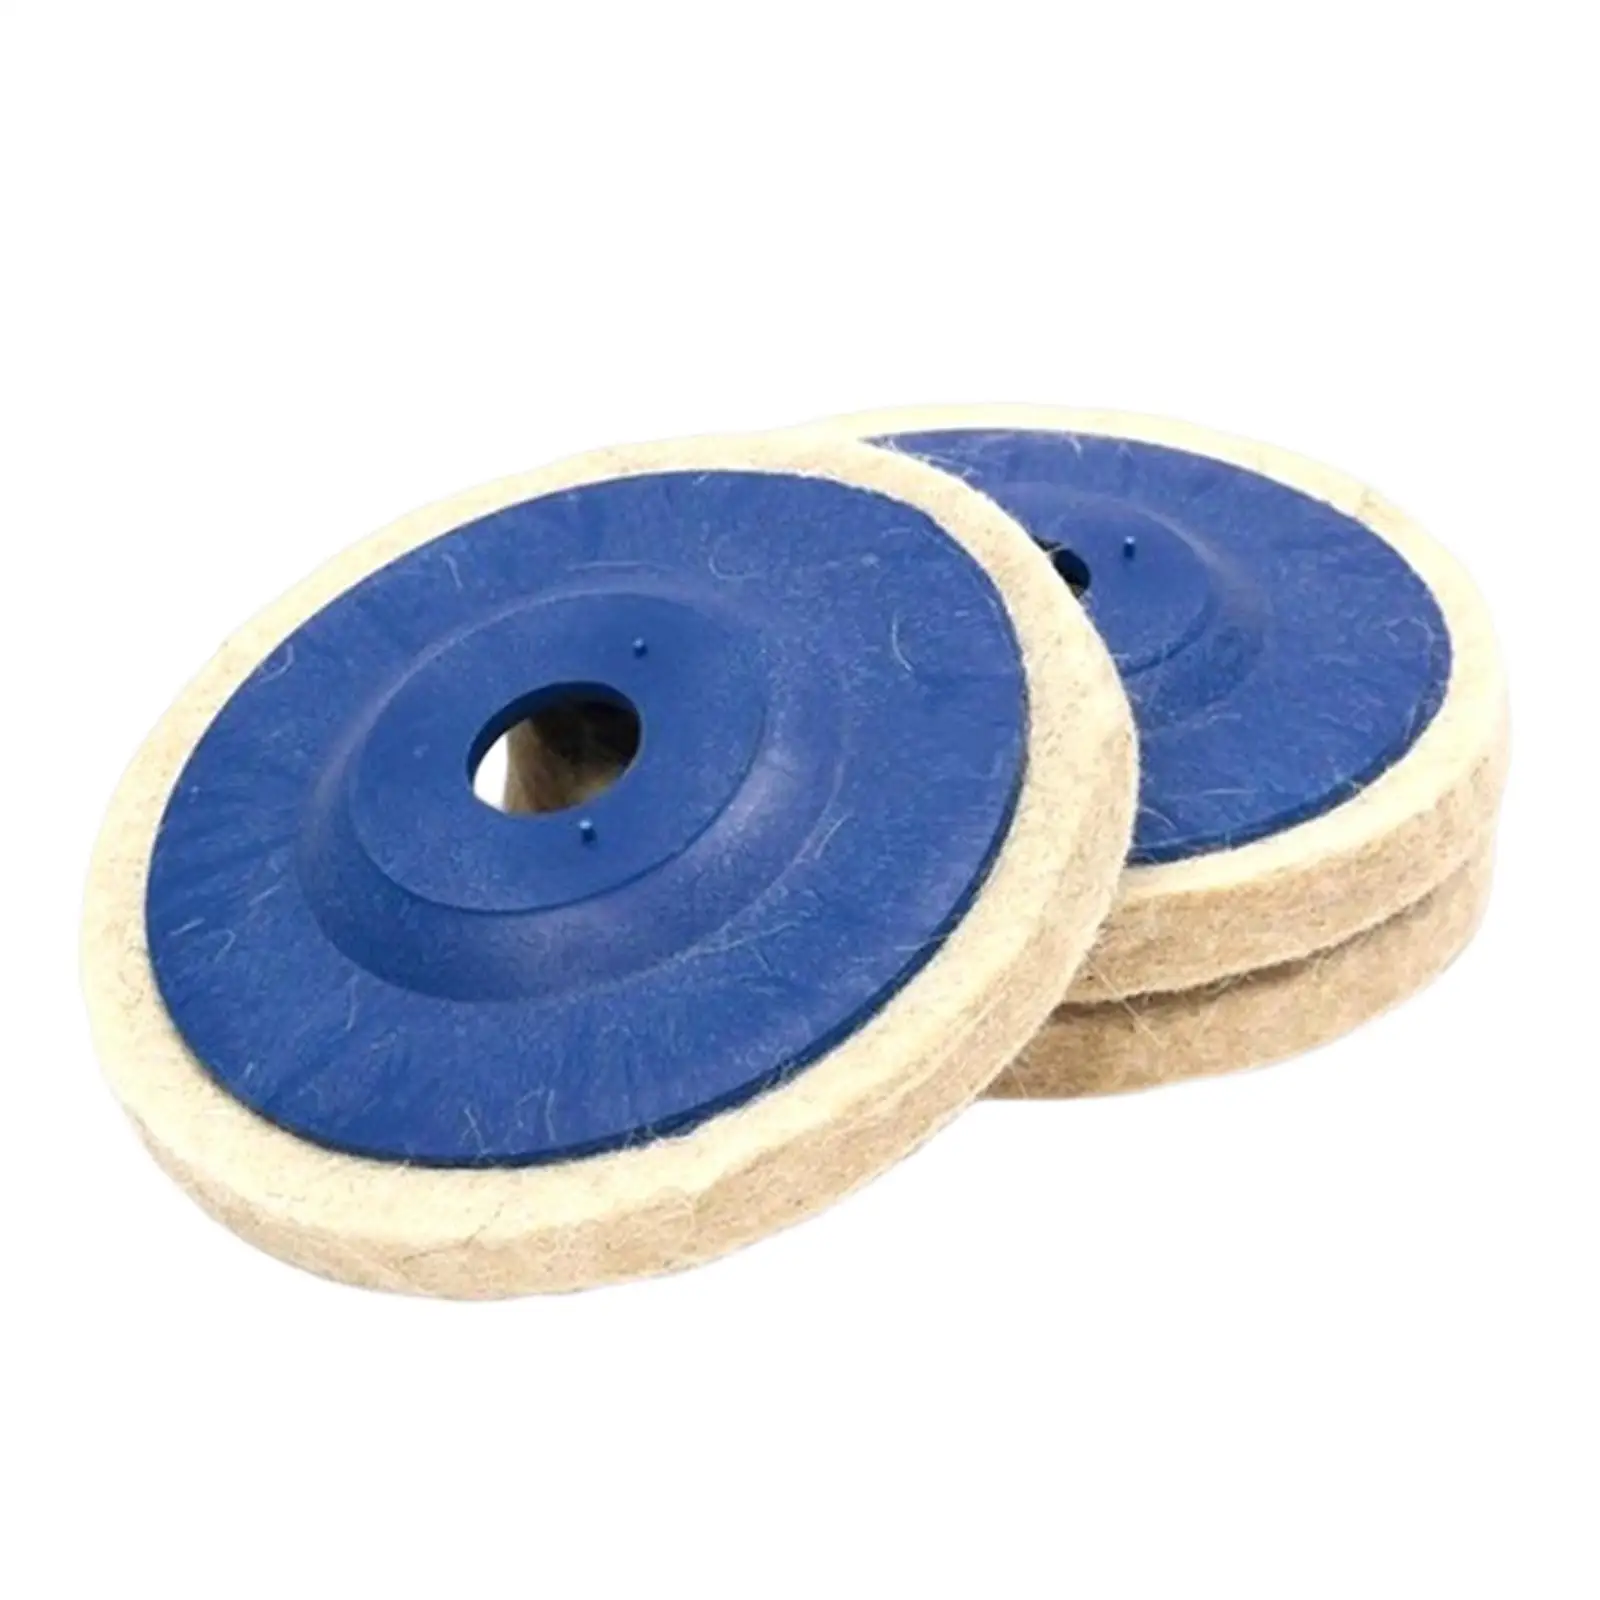 3Pcs Polishing Buffing Wheel Angel Grinder Disc Pad Cleaning Wood Supplies Cleaner Kitchen for Copper Ceramics Glass Marble